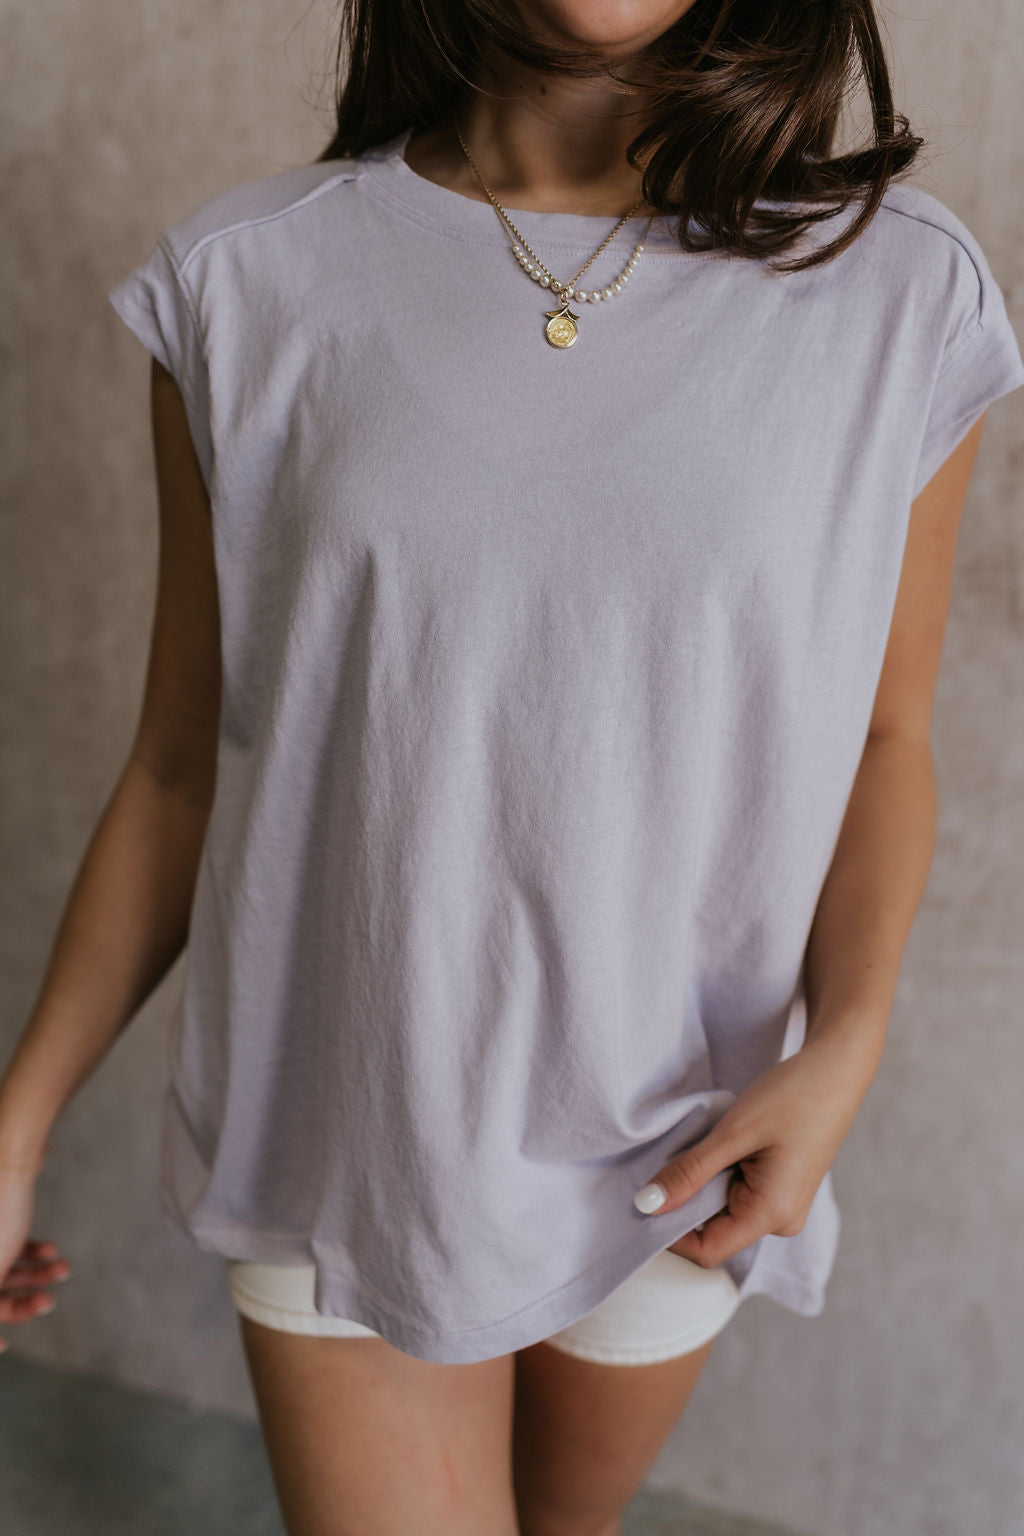 CLose up view of female model wearing the Khloe Lavender Short Sleeve Top which features Lavender Cotton Fabric, Round Neckline and Short Sleeves